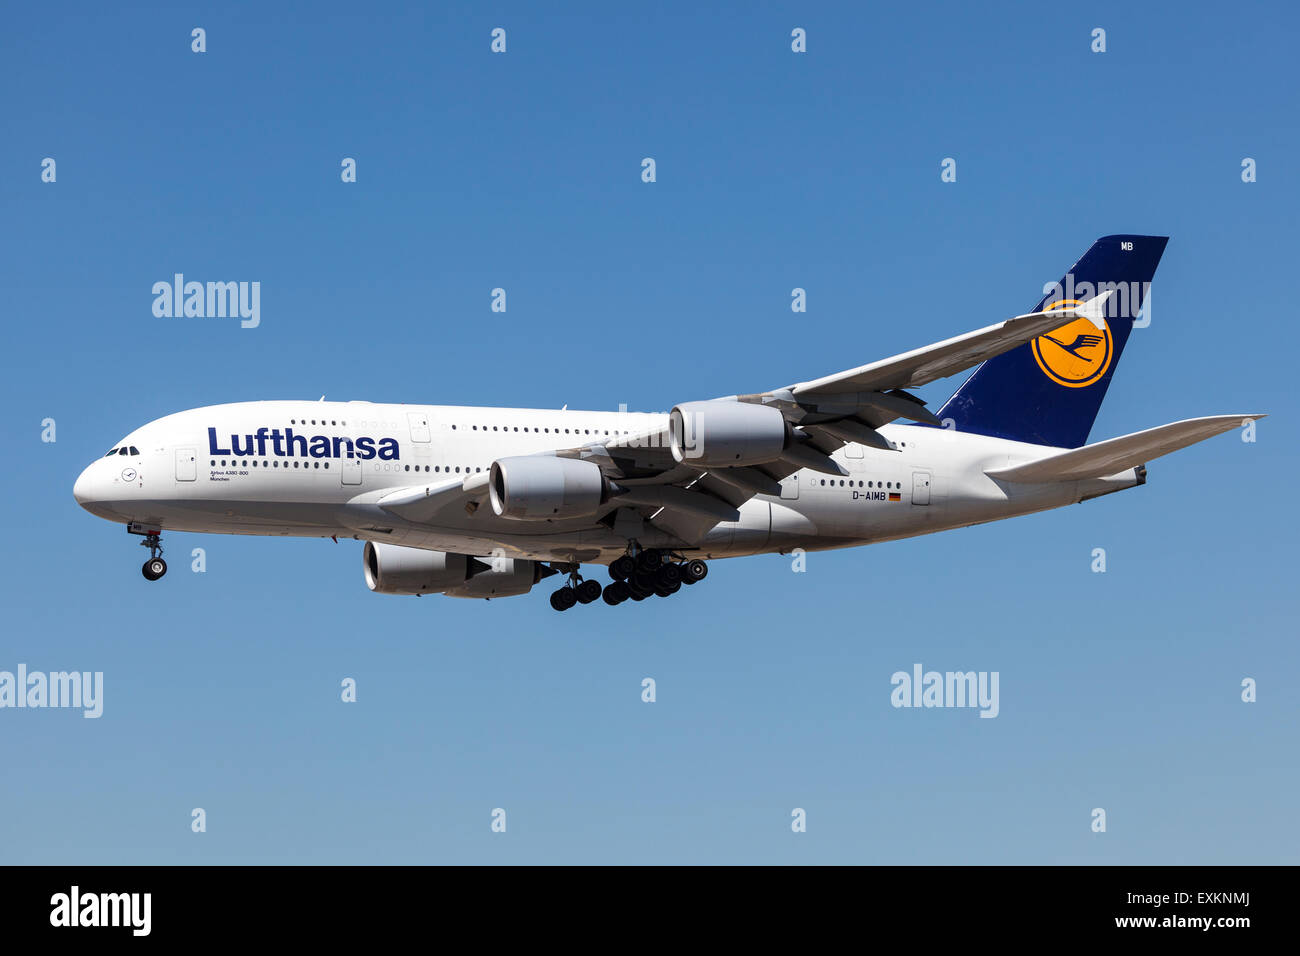 Airbus A380-800 airplane of the german airline Lufthansa which is based in Frankfurt. July 10, 2015 in Frankfurt Main, Germany Stock Photo